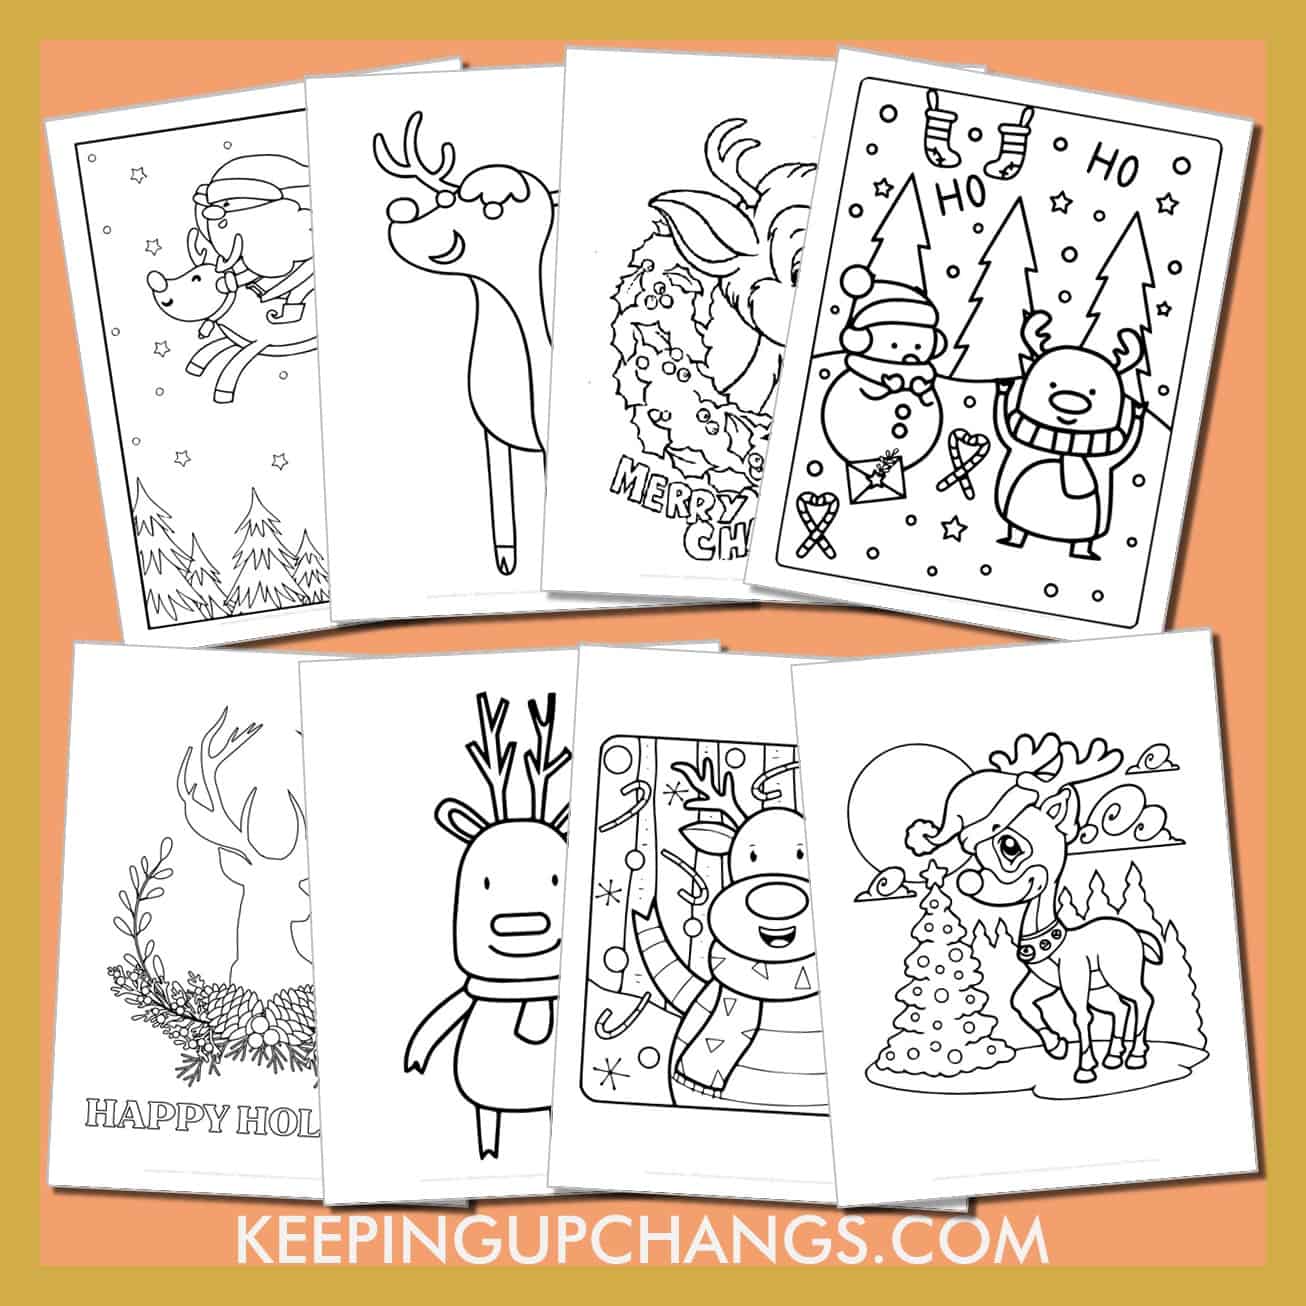 free reindeer colouring sheets including cute, easy, simple and detailed winter christmas designs.